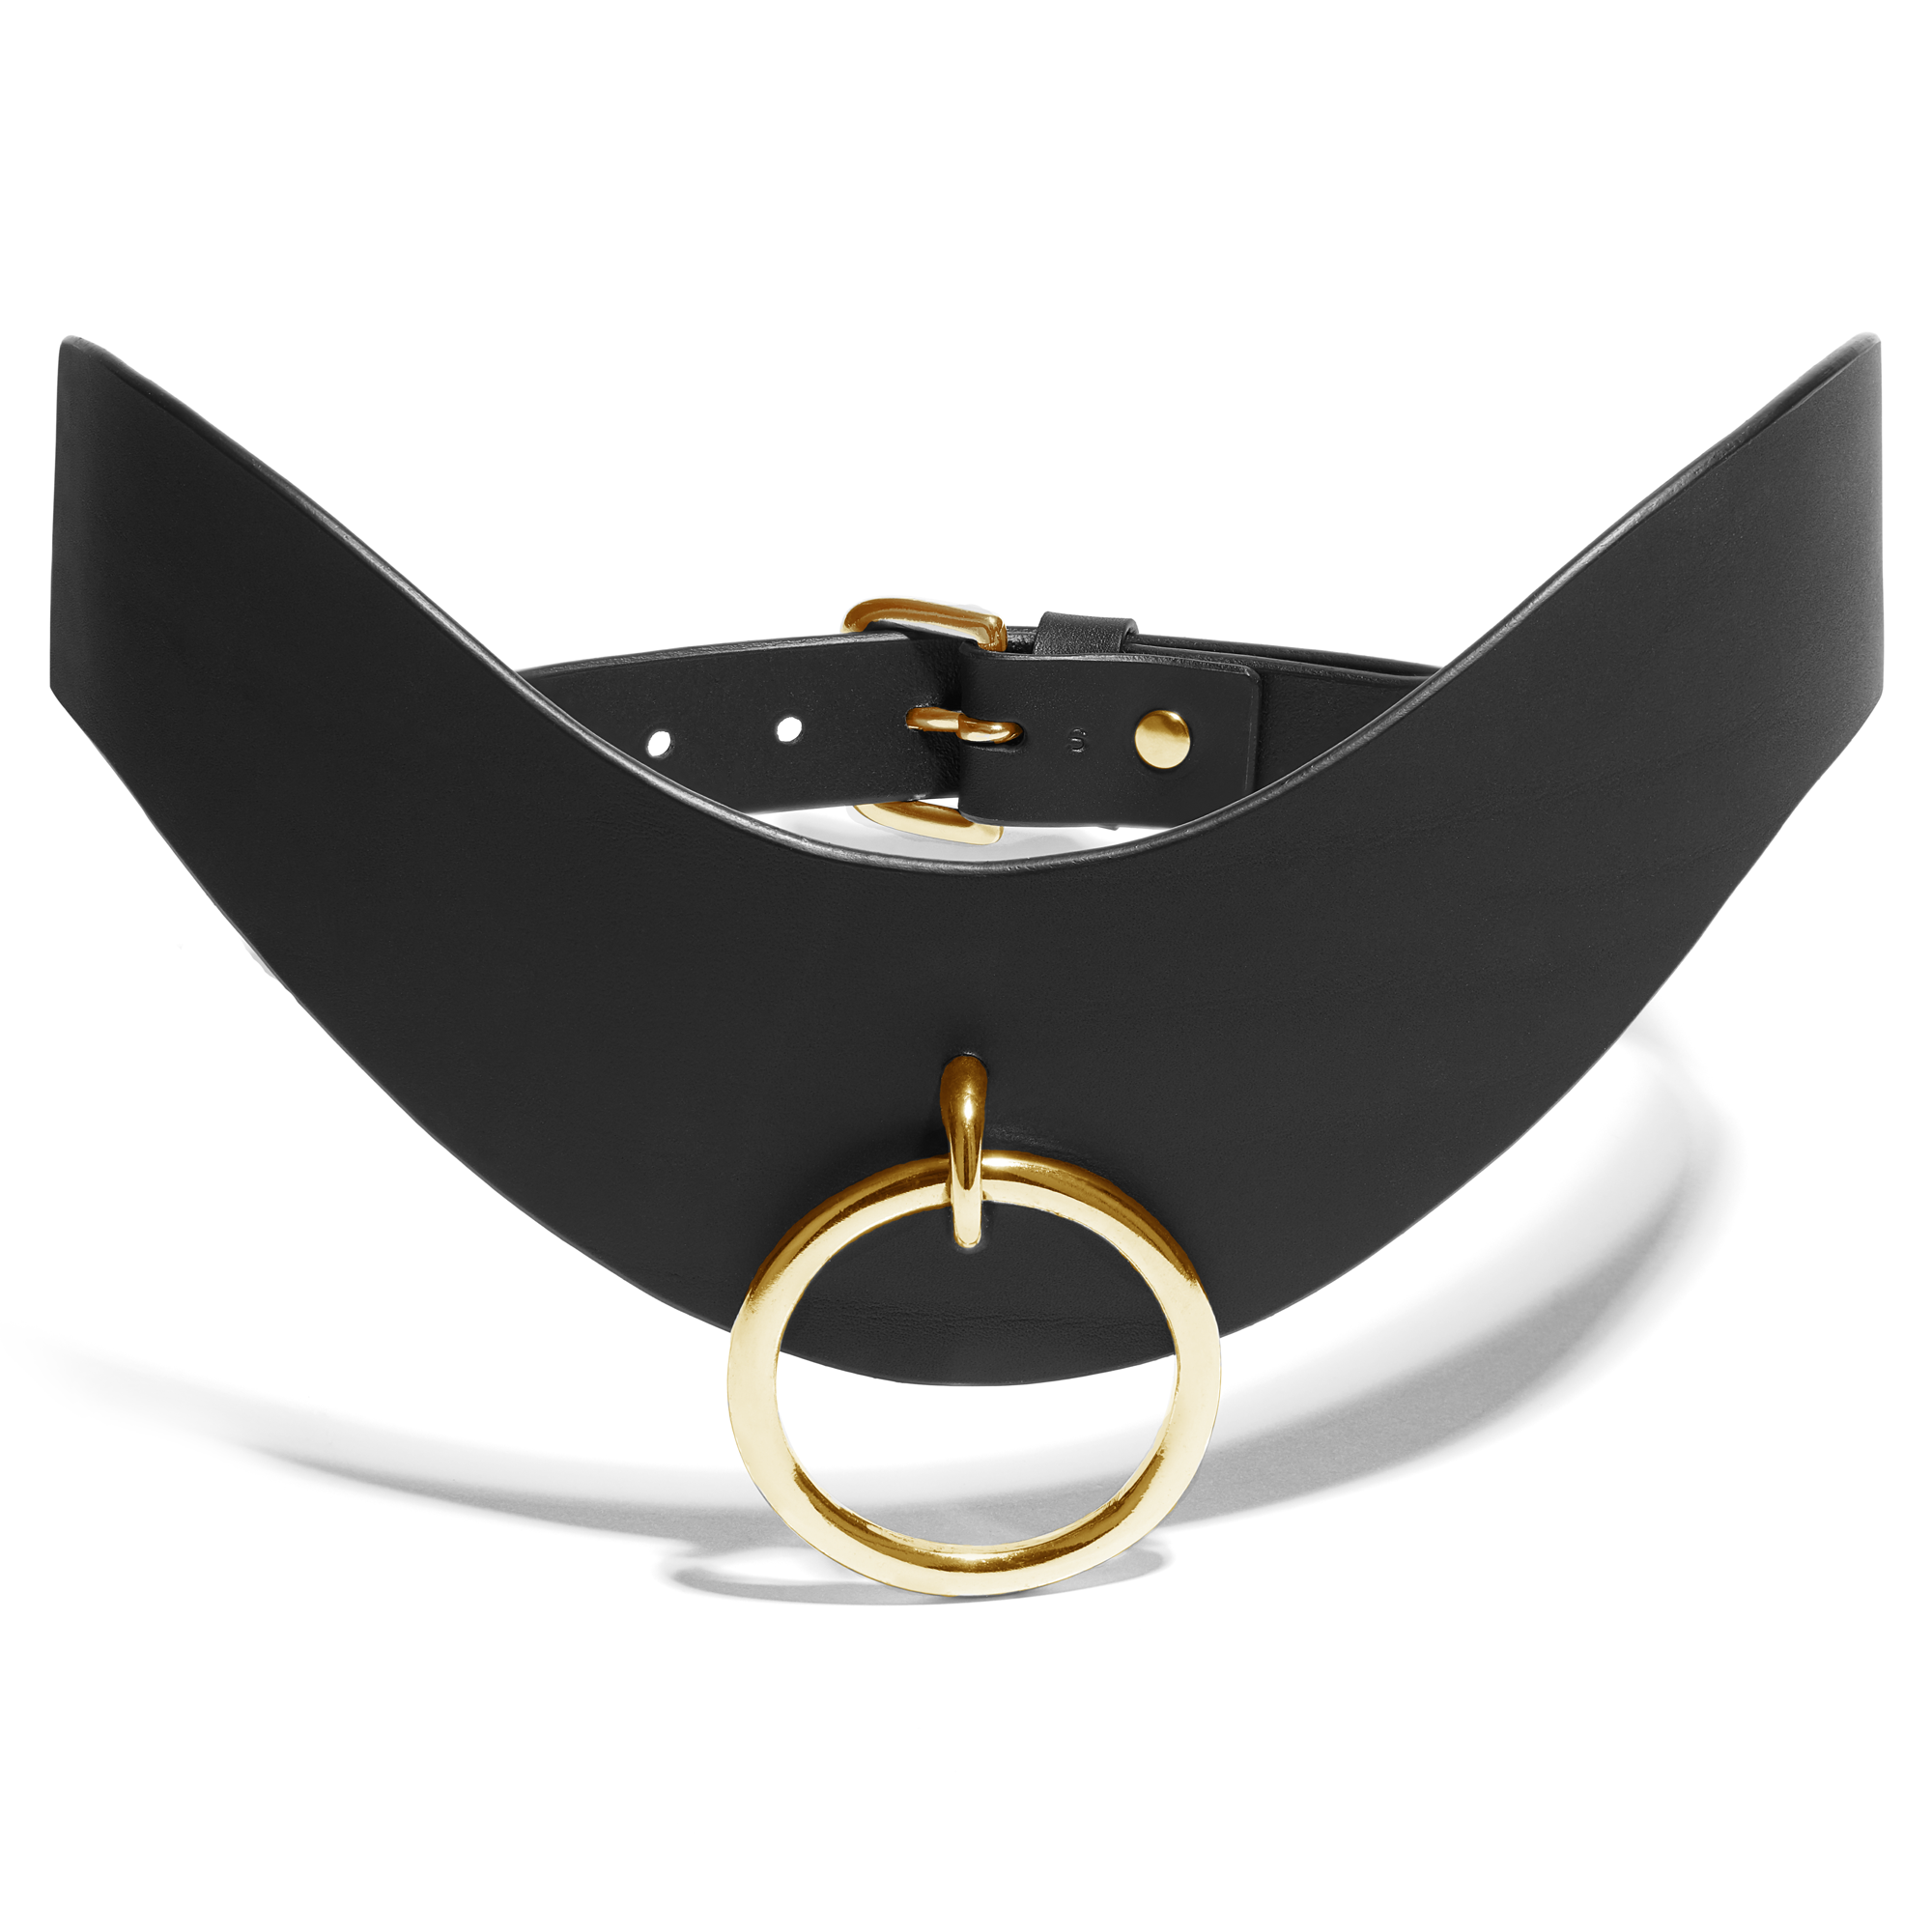 Fleet Ilya O-ring curved belt in black leather with large brass o ring on front